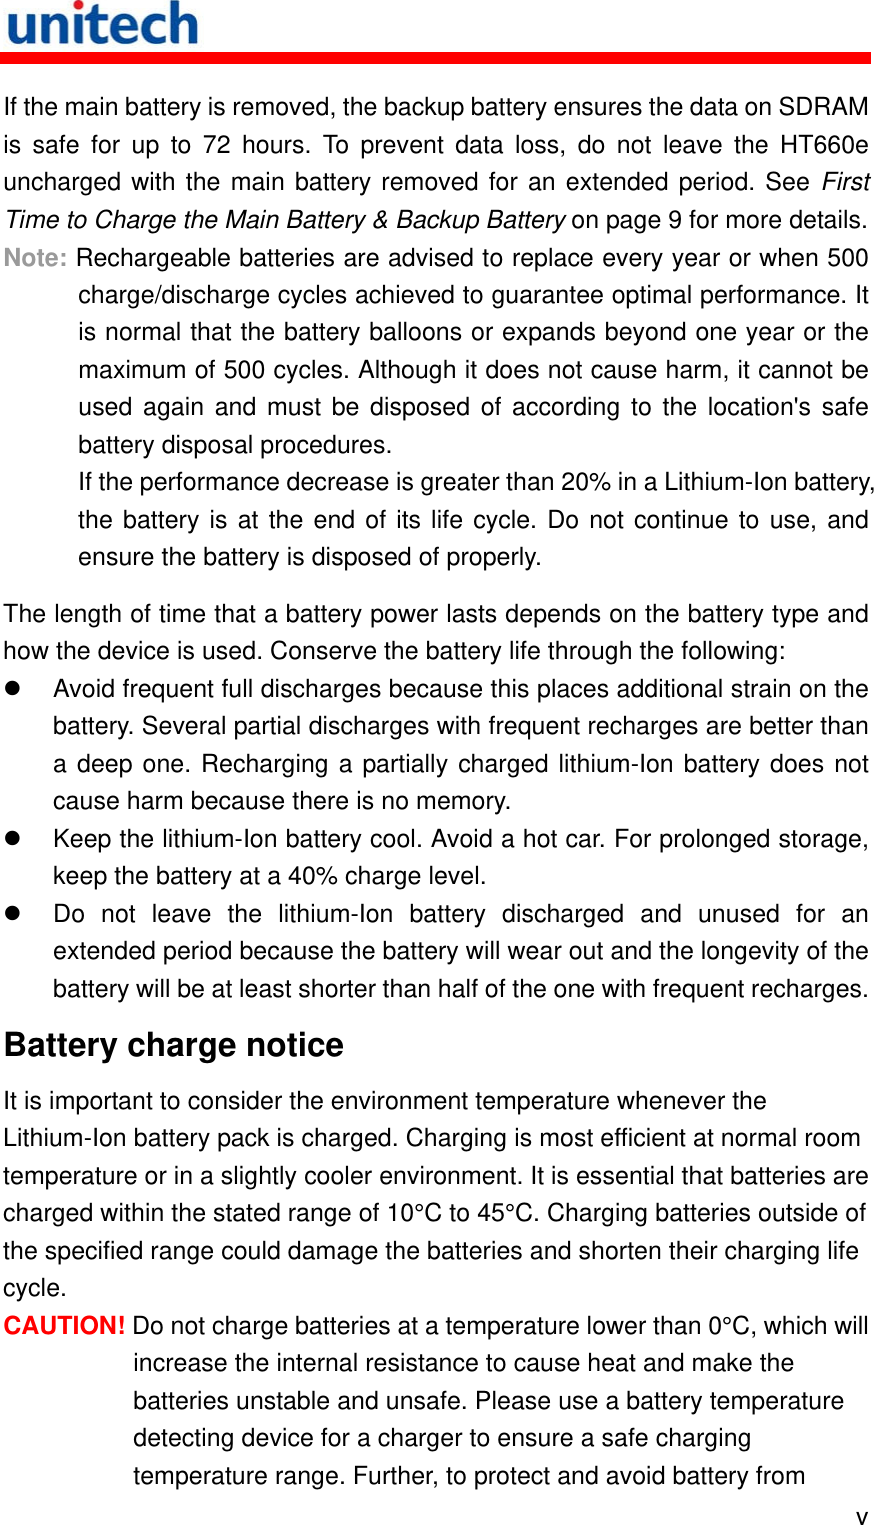   v If the main battery is removed, the backup battery ensures the data on SDRAM is safe for up to 72 hours. To prevent data loss, do not leave the HT660e uncharged with the main battery removed for an extended period. See First Time to Charge the Main Battery &amp; Backup Battery on page 9 for more details. Note: Rechargeable batteries are advised to replace every year or when 500 charge/discharge cycles achieved to guarantee optimal performance. It is normal that the battery balloons or expands beyond one year or the maximum of 500 cycles. Although it does not cause harm, it cannot be used again and must be disposed of according to the location&apos;s safe battery disposal procedures. If the performance decrease is greater than 20% in a Lithium-Ion battery, the battery is at the end of its life cycle. Do not continue to use, and ensure the battery is disposed of properly. The length of time that a battery power lasts depends on the battery type and how the device is used. Conserve the battery life through the following:   Avoid frequent full discharges because this places additional strain on the battery. Several partial discharges with frequent recharges are better than a deep one. Recharging a partially charged lithium-Ion battery does not cause harm because there is no memory.   Keep the lithium-Ion battery cool. Avoid a hot car. For prolonged storage, keep the battery at a 40% charge level.   Do not leave the lithium-Ion battery discharged and unused for an extended period because the battery will wear out and the longevity of the battery will be at least shorter than half of the one with frequent recharges. Battery charge notice It is important to consider the environment temperature whenever the Lithium-Ion battery pack is charged. Charging is most efficient at normal room temperature or in a slightly cooler environment. It is essential that batteries are charged within the stated range of 10°C to 45°C. Charging batteries outside of the specified range could damage the batteries and shorten their charging life cycle. CAUTION! Do not charge batteries at a temperature lower than 0°C, which will increase the internal resistance to cause heat and make the batteries unstable and unsafe. Please use a battery temperature detecting device for a charger to ensure a safe charging temperature range. Further, to protect and avoid battery from 